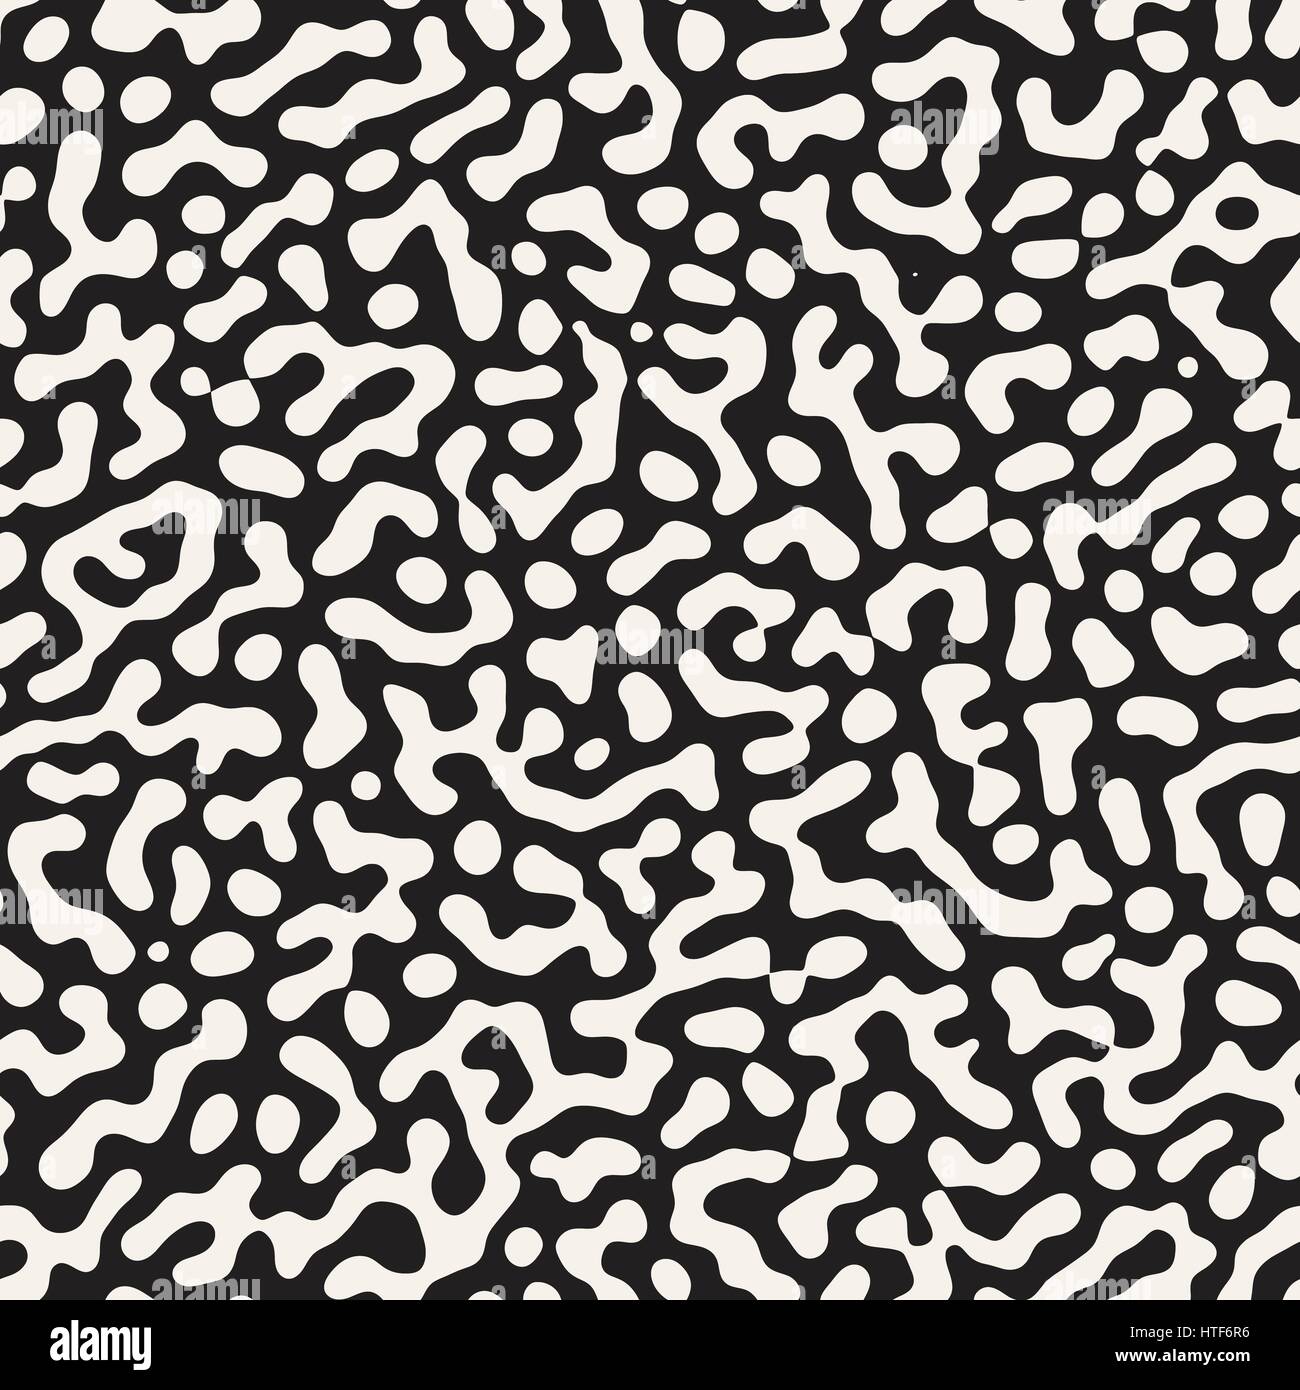 Vector Seamless Grunge Pattern. Black and White Organic Shapes. Messy Spots Texture. Abstract Background Illustration Stock Vector